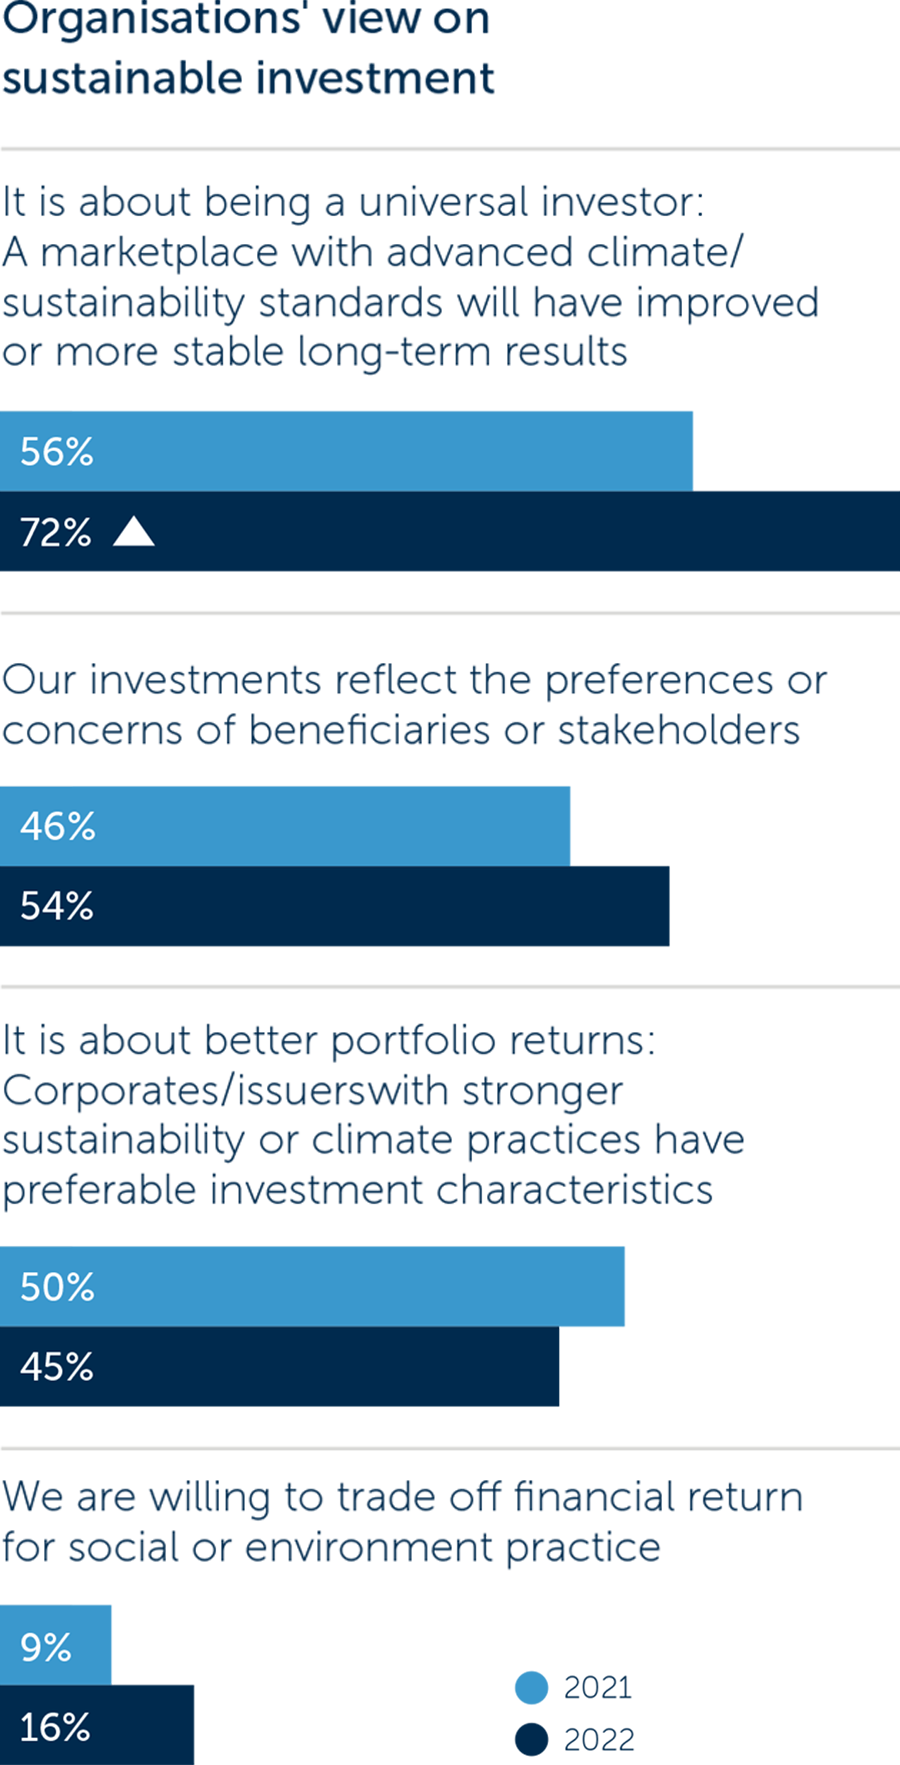 Organisations' view of sustainable investment